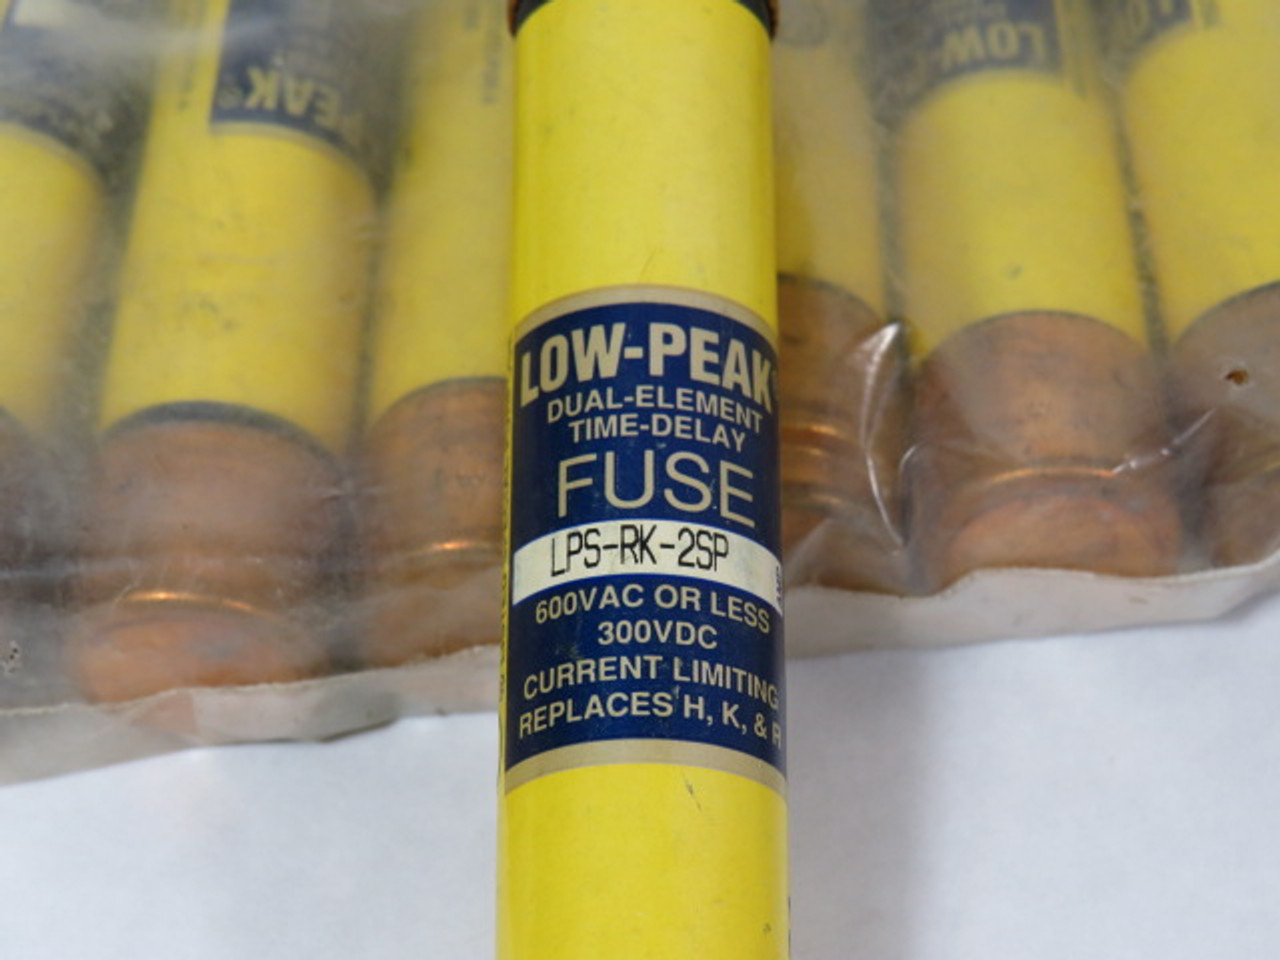 Low-Peak LPS-RK-2SP Dual Element Fuse 2A 600V Lot of 10 USED